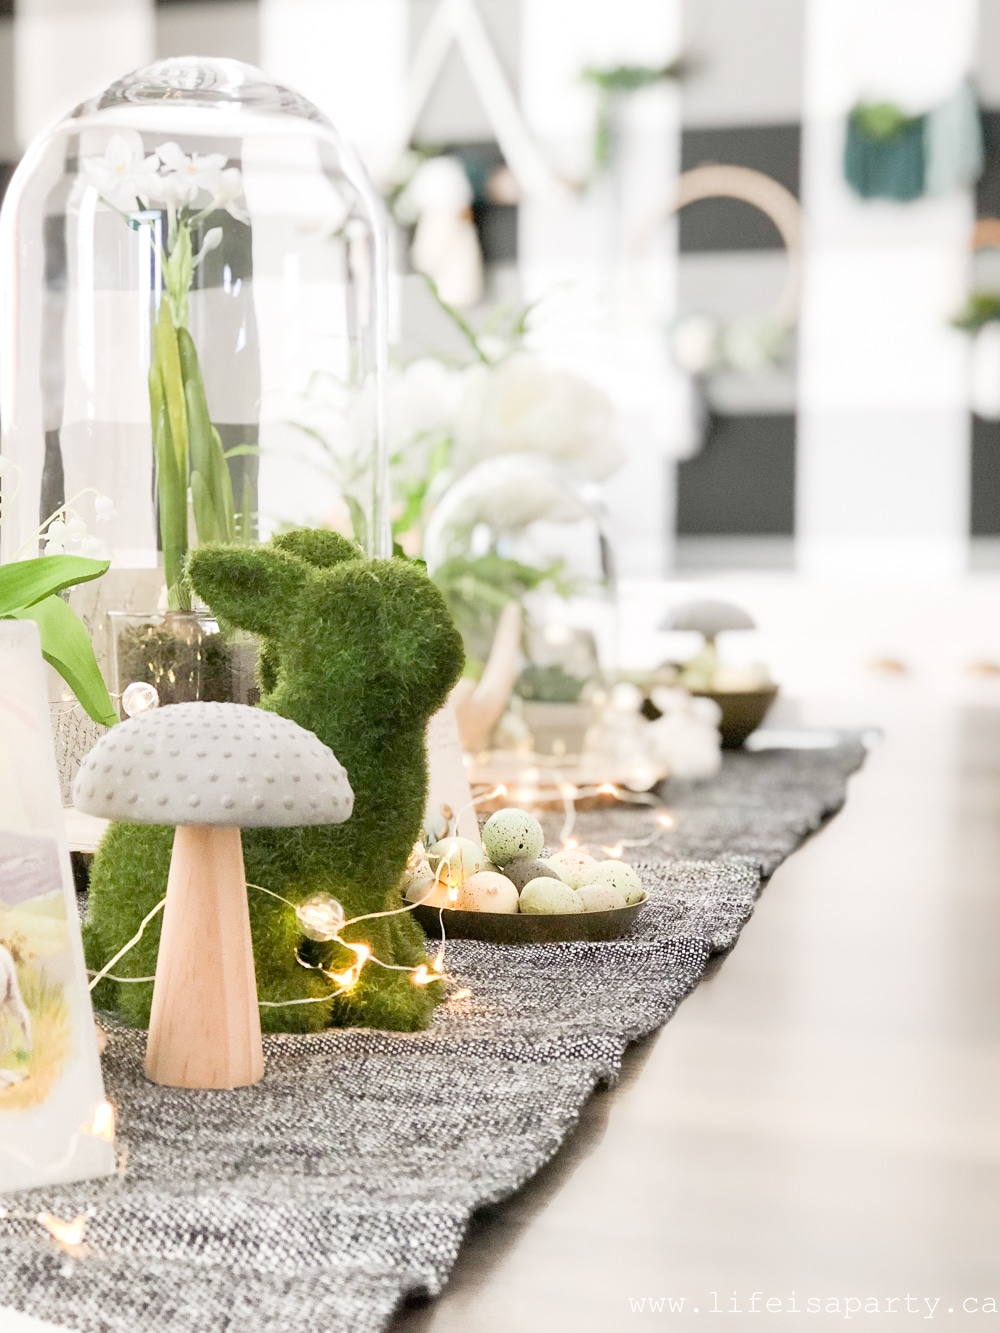 Spring Home Tour: black, white and green decor for spring including lots and lots of plants, flowers, vintage and Easter touches.